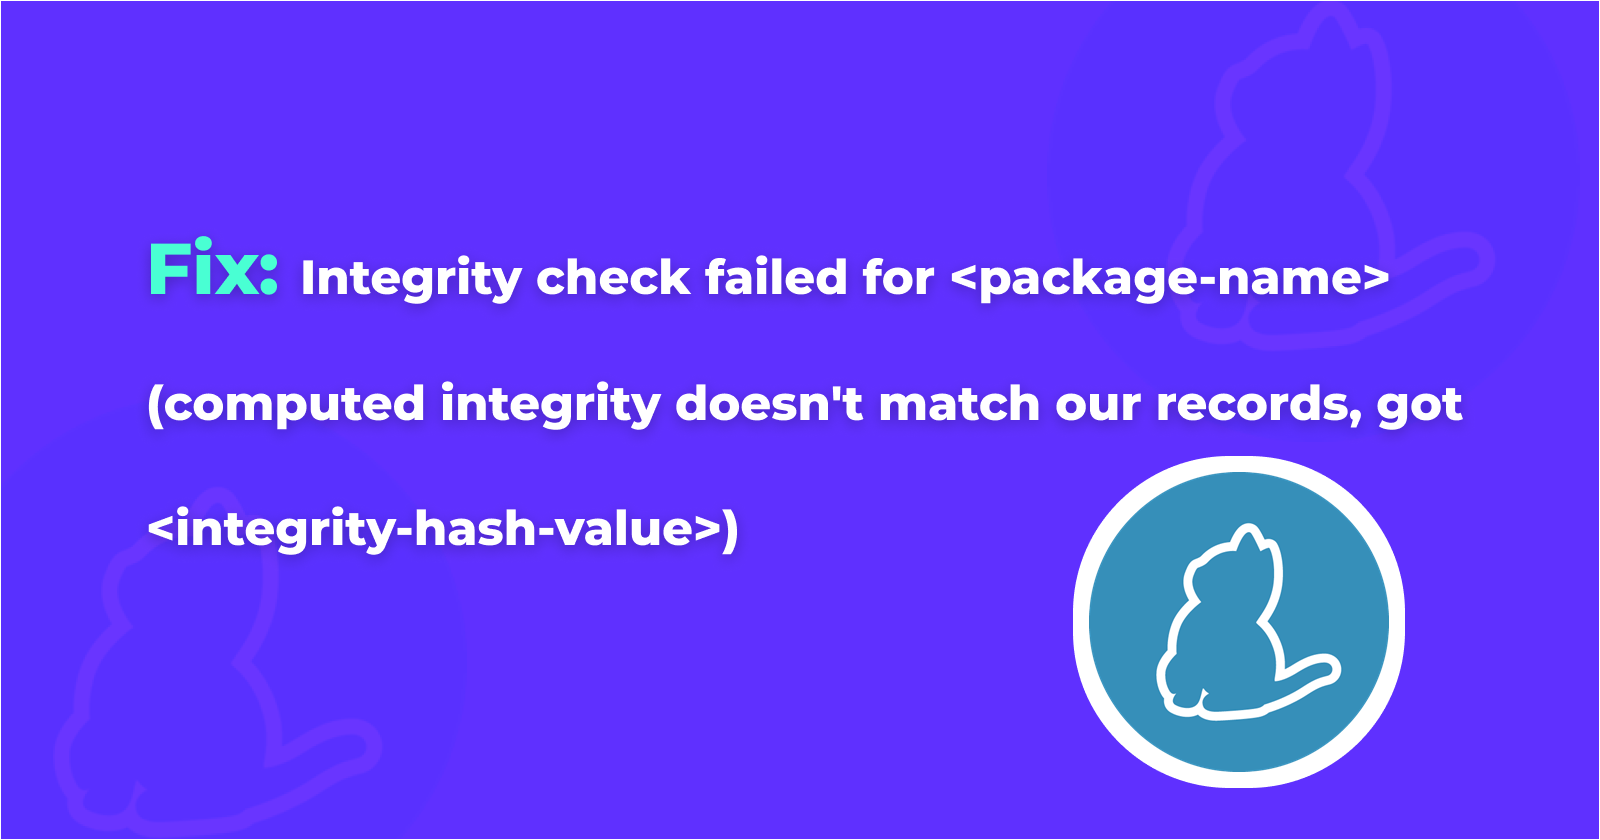 Fix: Integrity check failed for "any-package-name" (yarn)